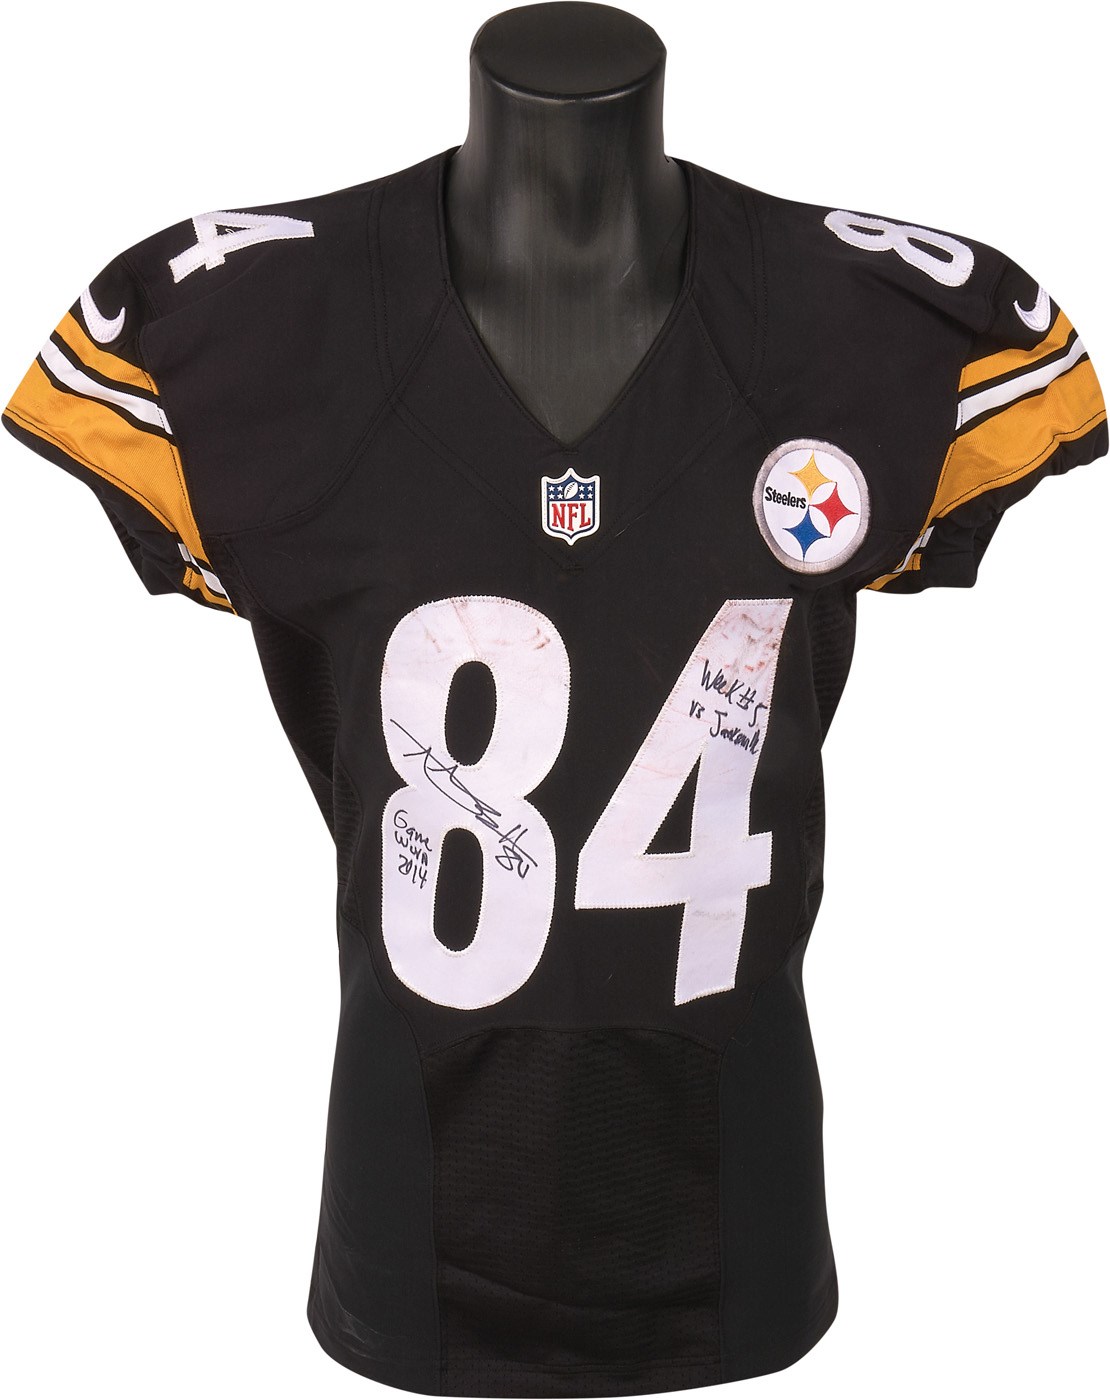 Football - 2014 Antonio Brown Pittsburgh Steelers Game Worn Jersey (Direct from Brown & Photo-Matched)